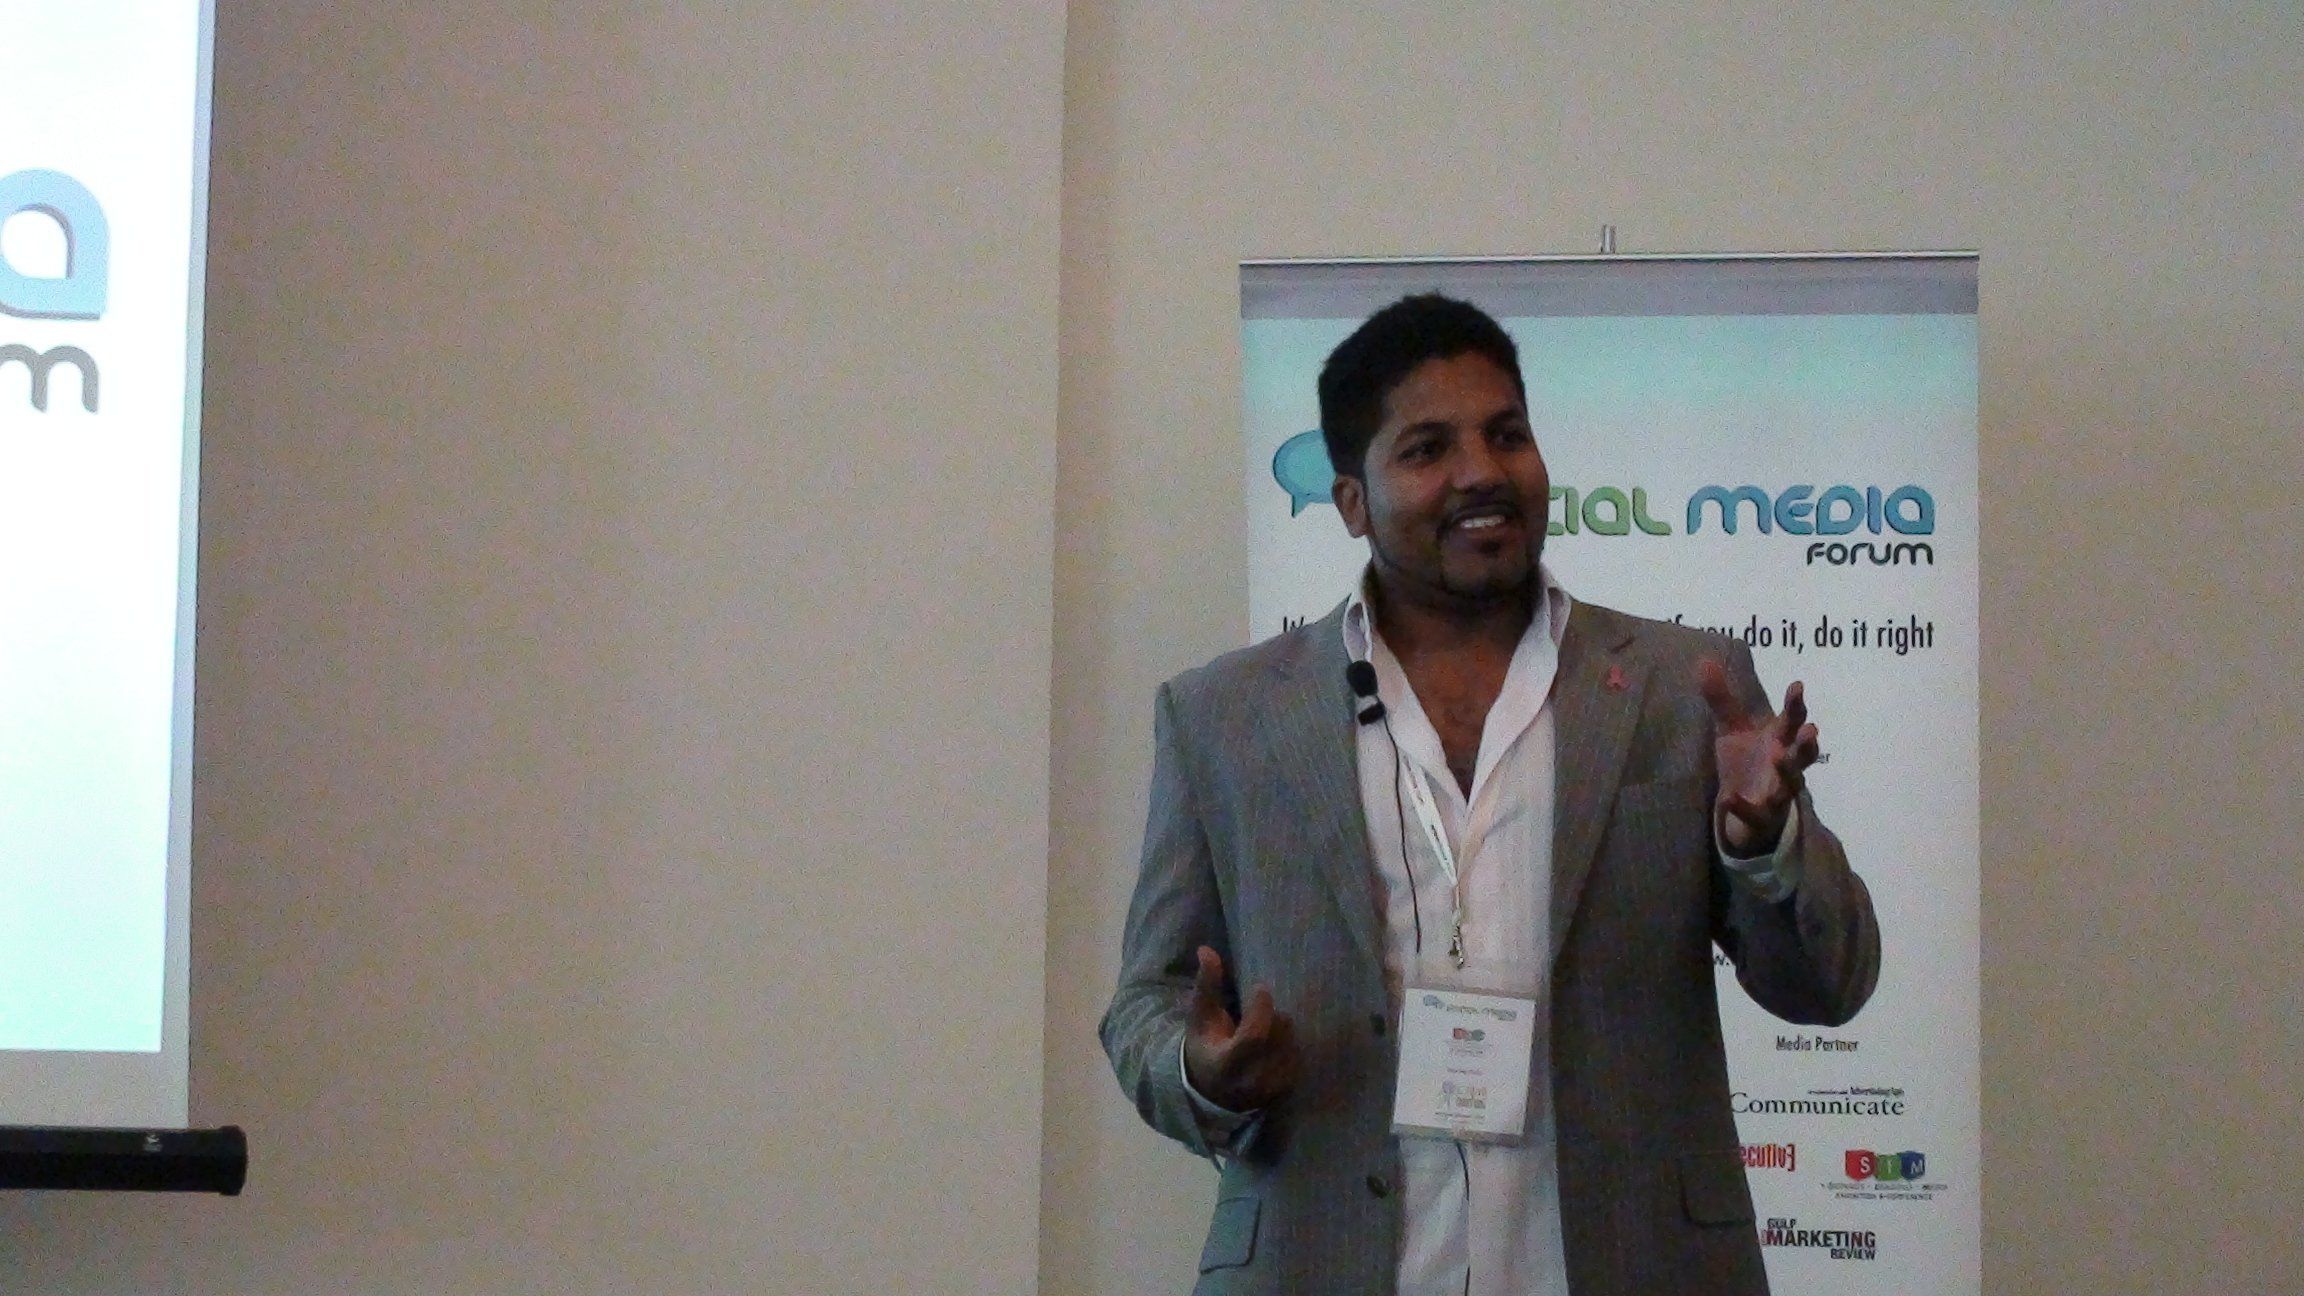 Muneer speaks about digital marketing trends at industry events